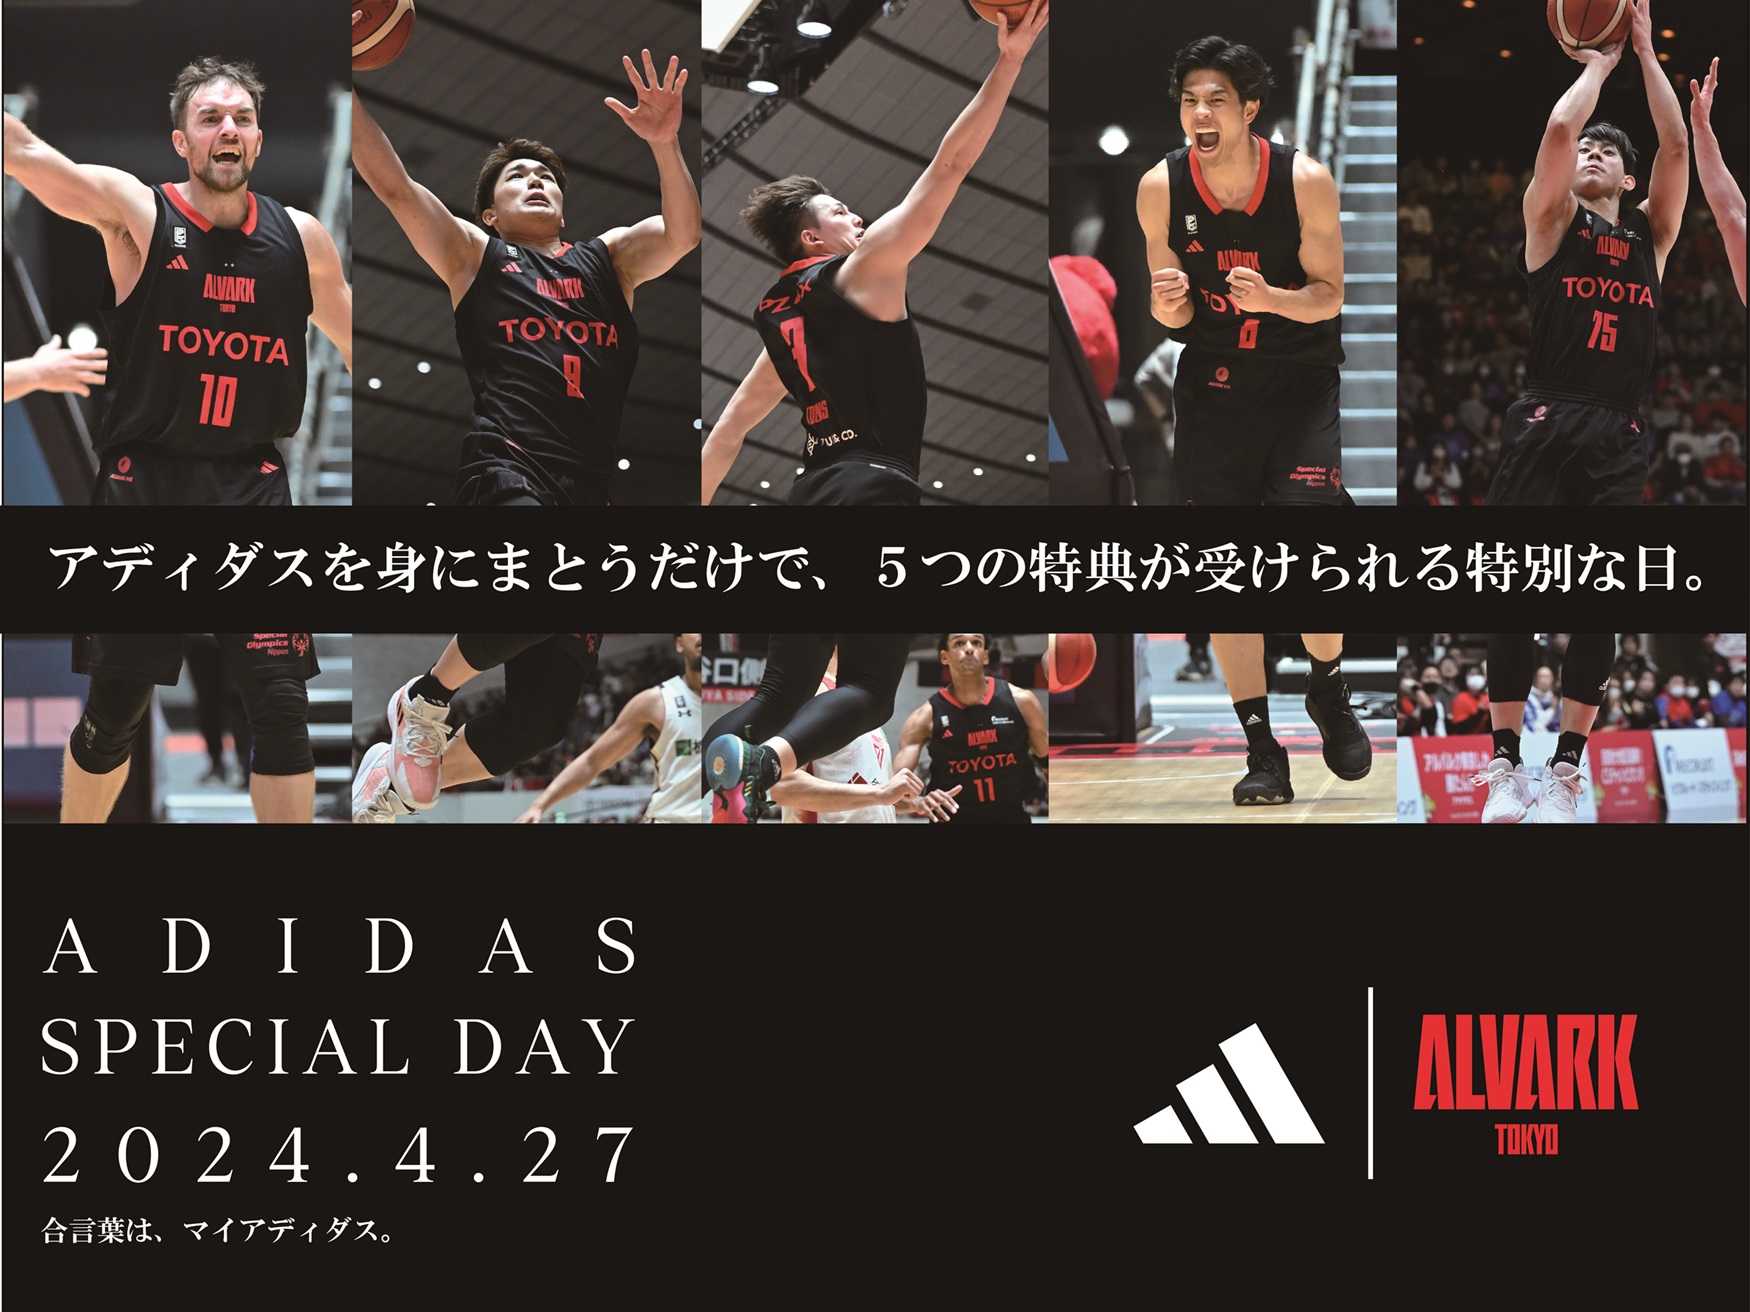 ADIDAS SPECIAL DAY